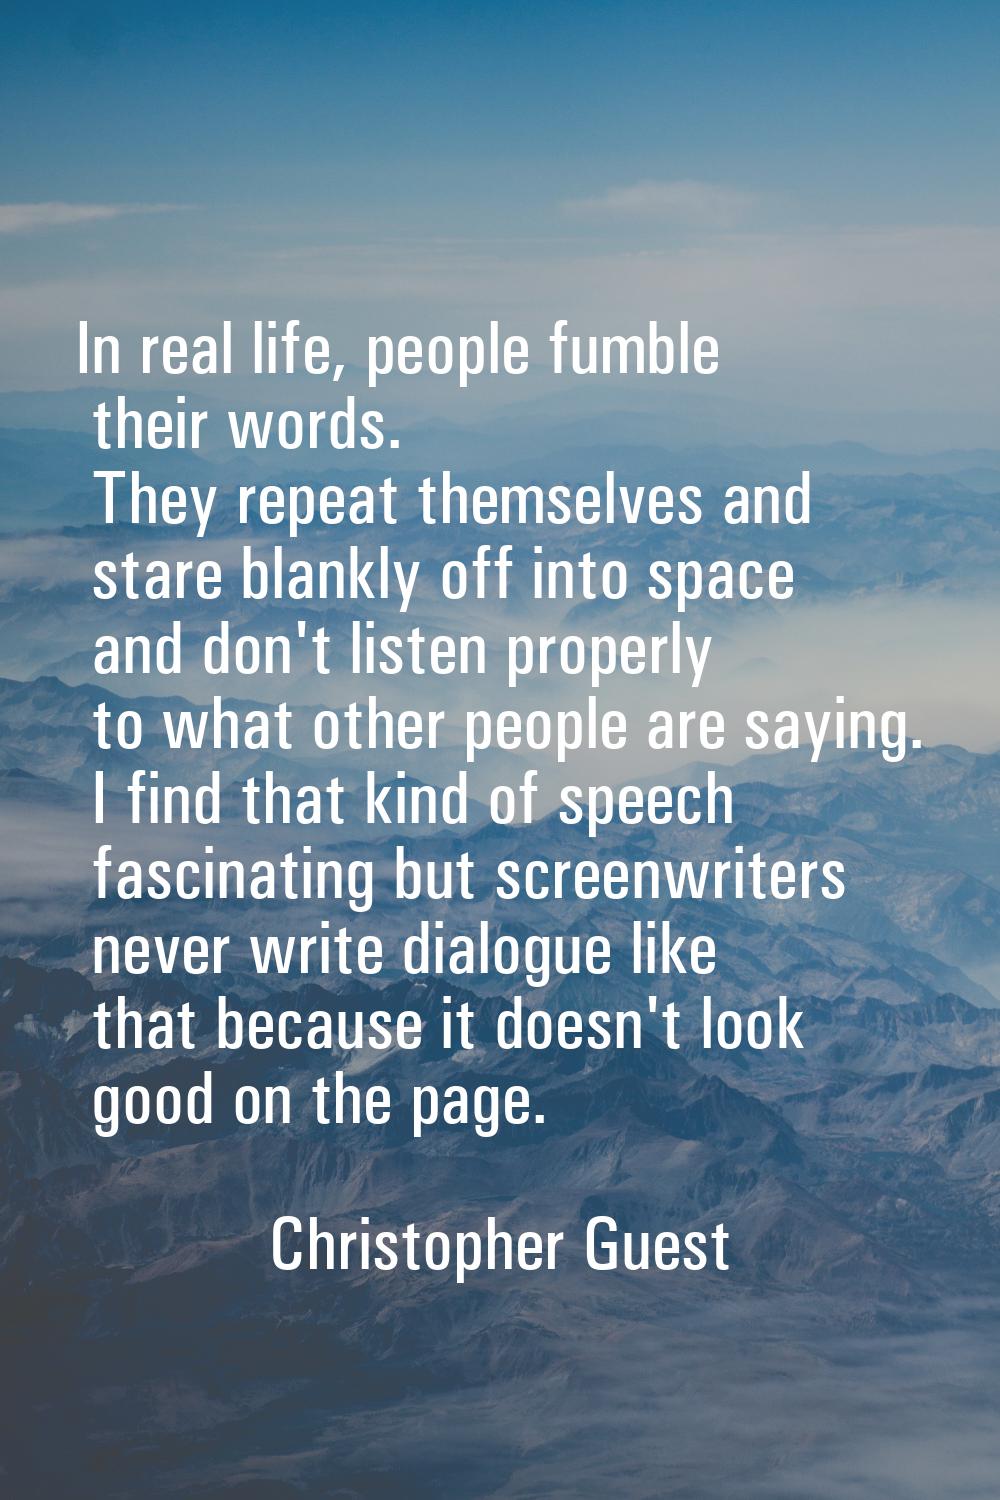 In real life, people fumble their words. They repeat themselves and stare blankly off into space an